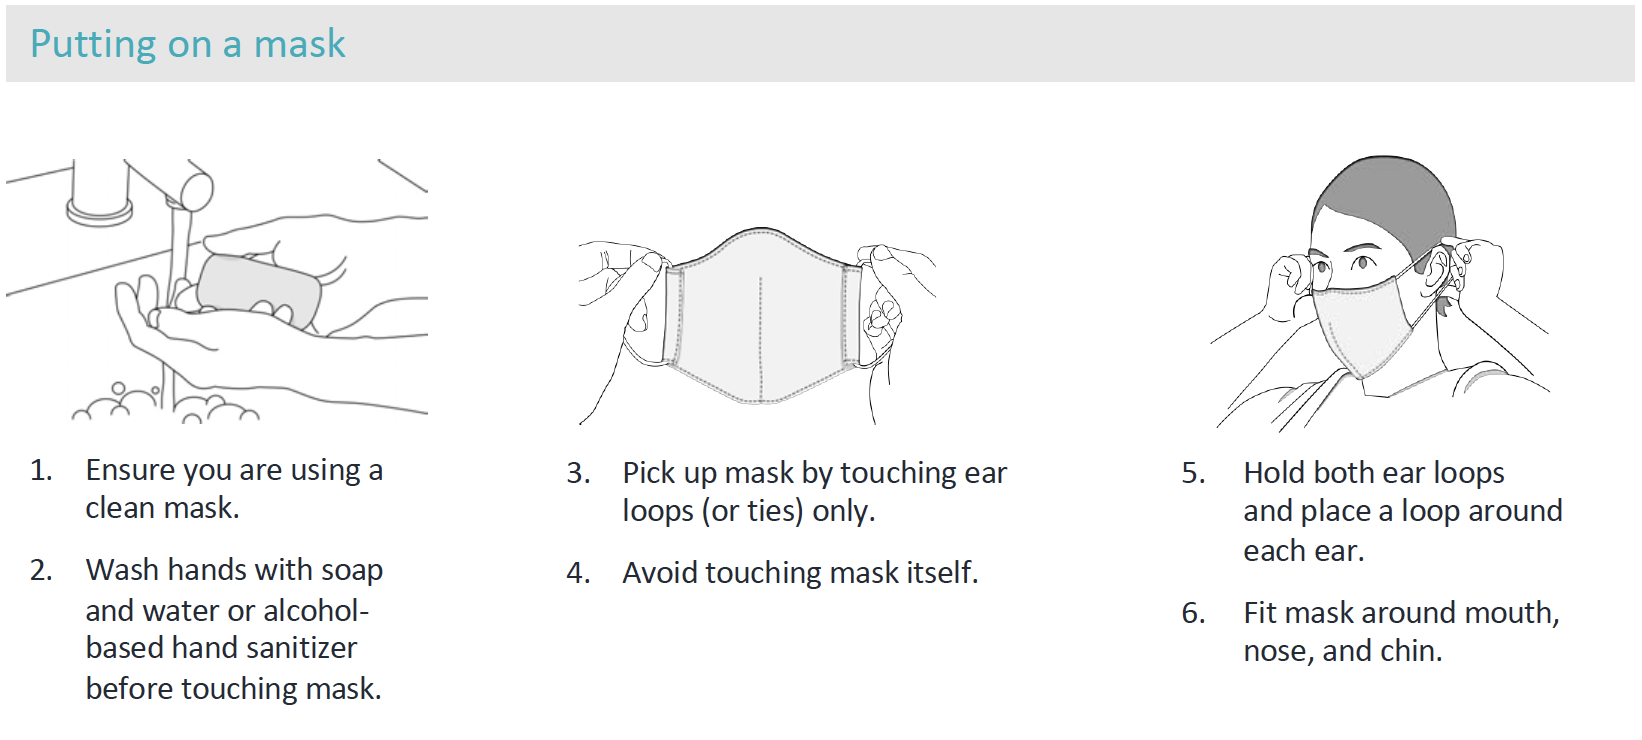 Instructions on how to clean and wear your face mask